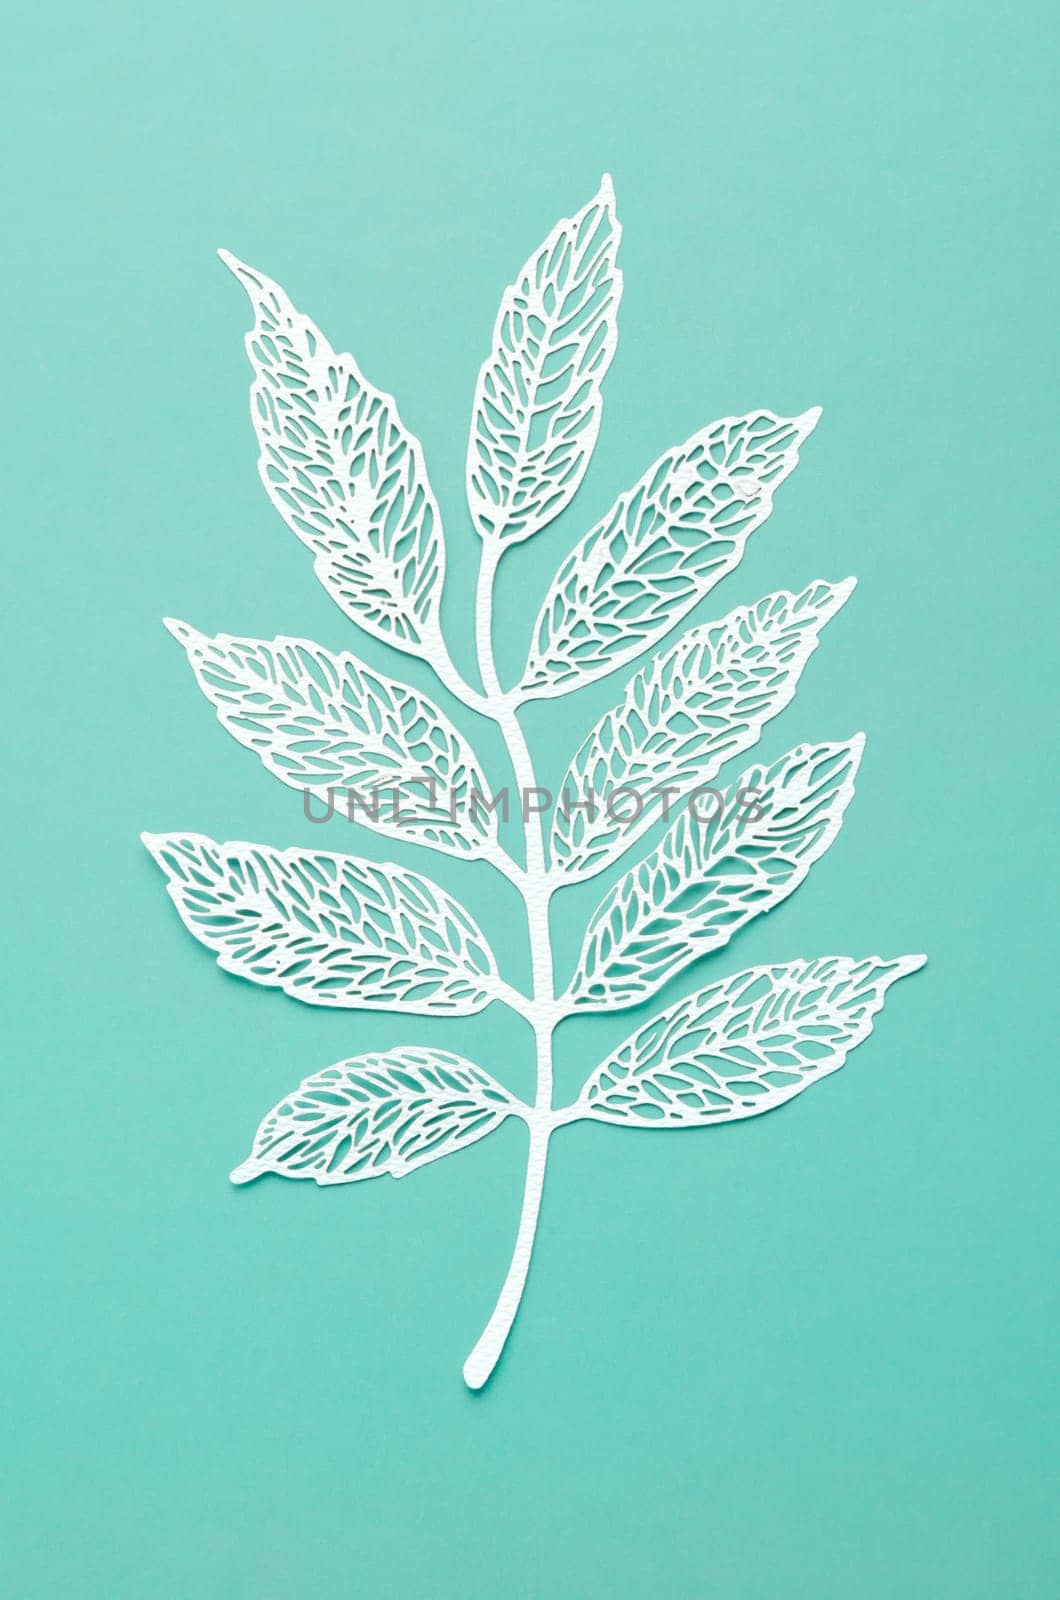 The Carve of white paper leaves on a light green cardboard background. by Gamjai